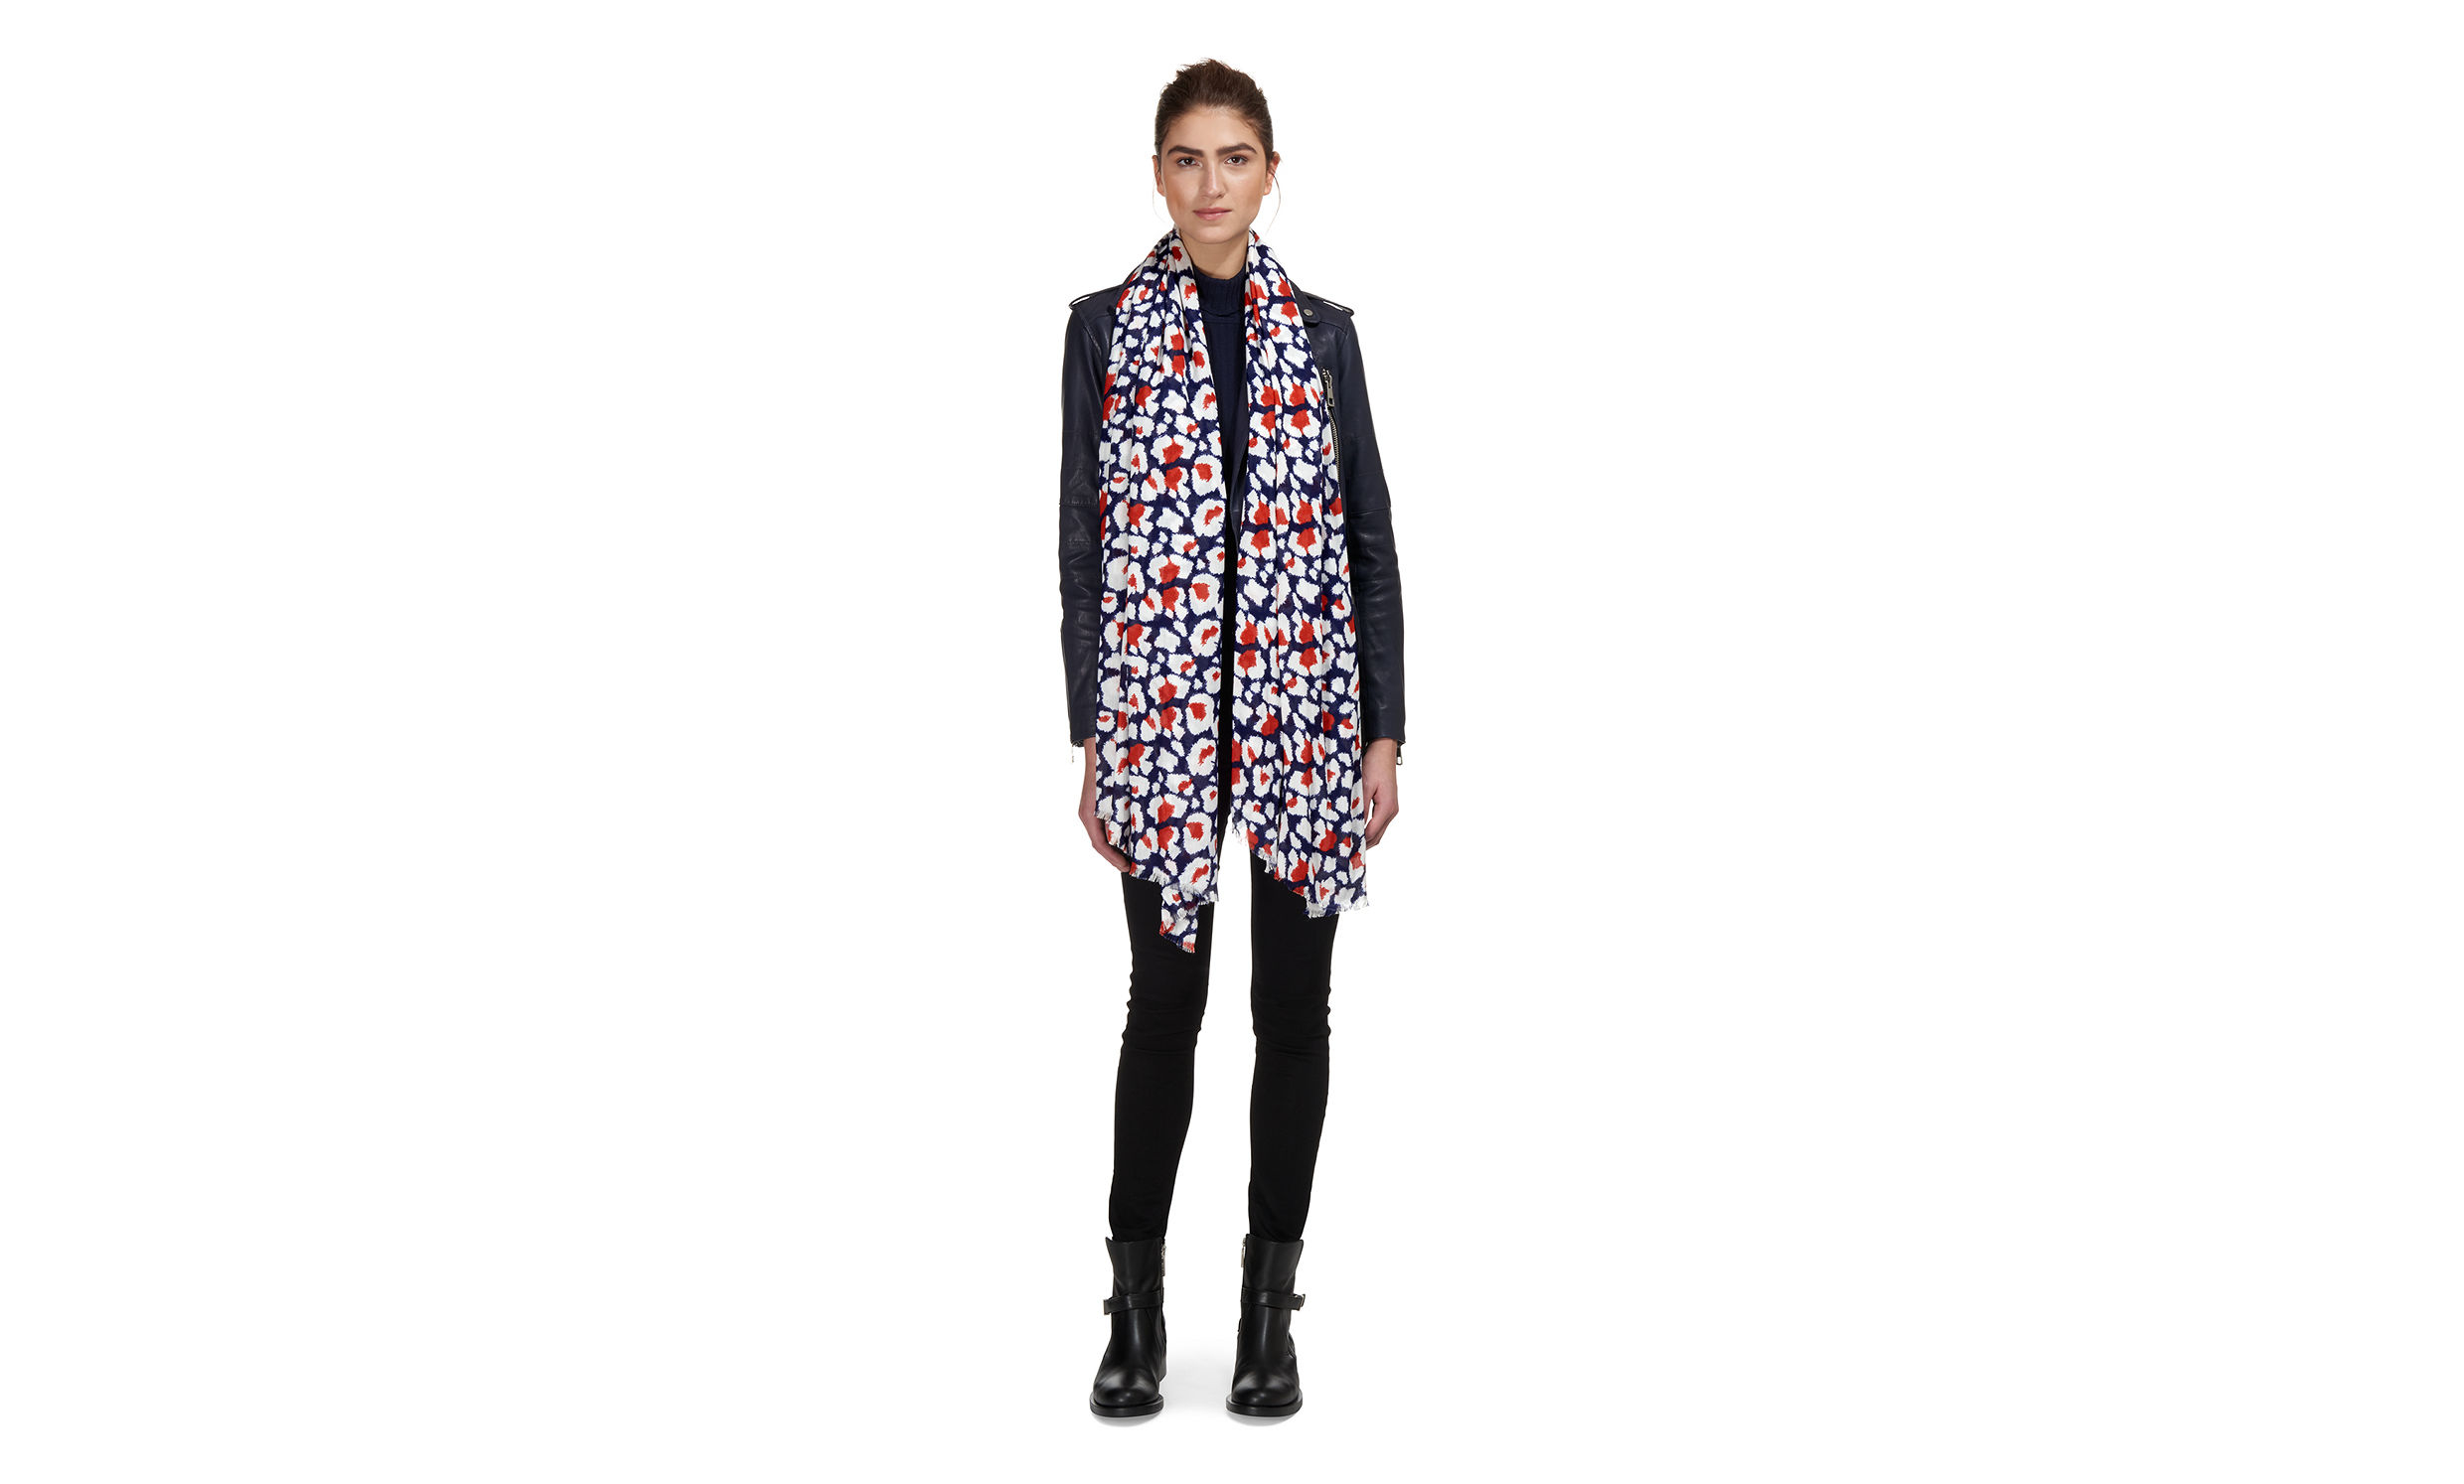 Lyst - Whistles Floral Leopard Print Scarf